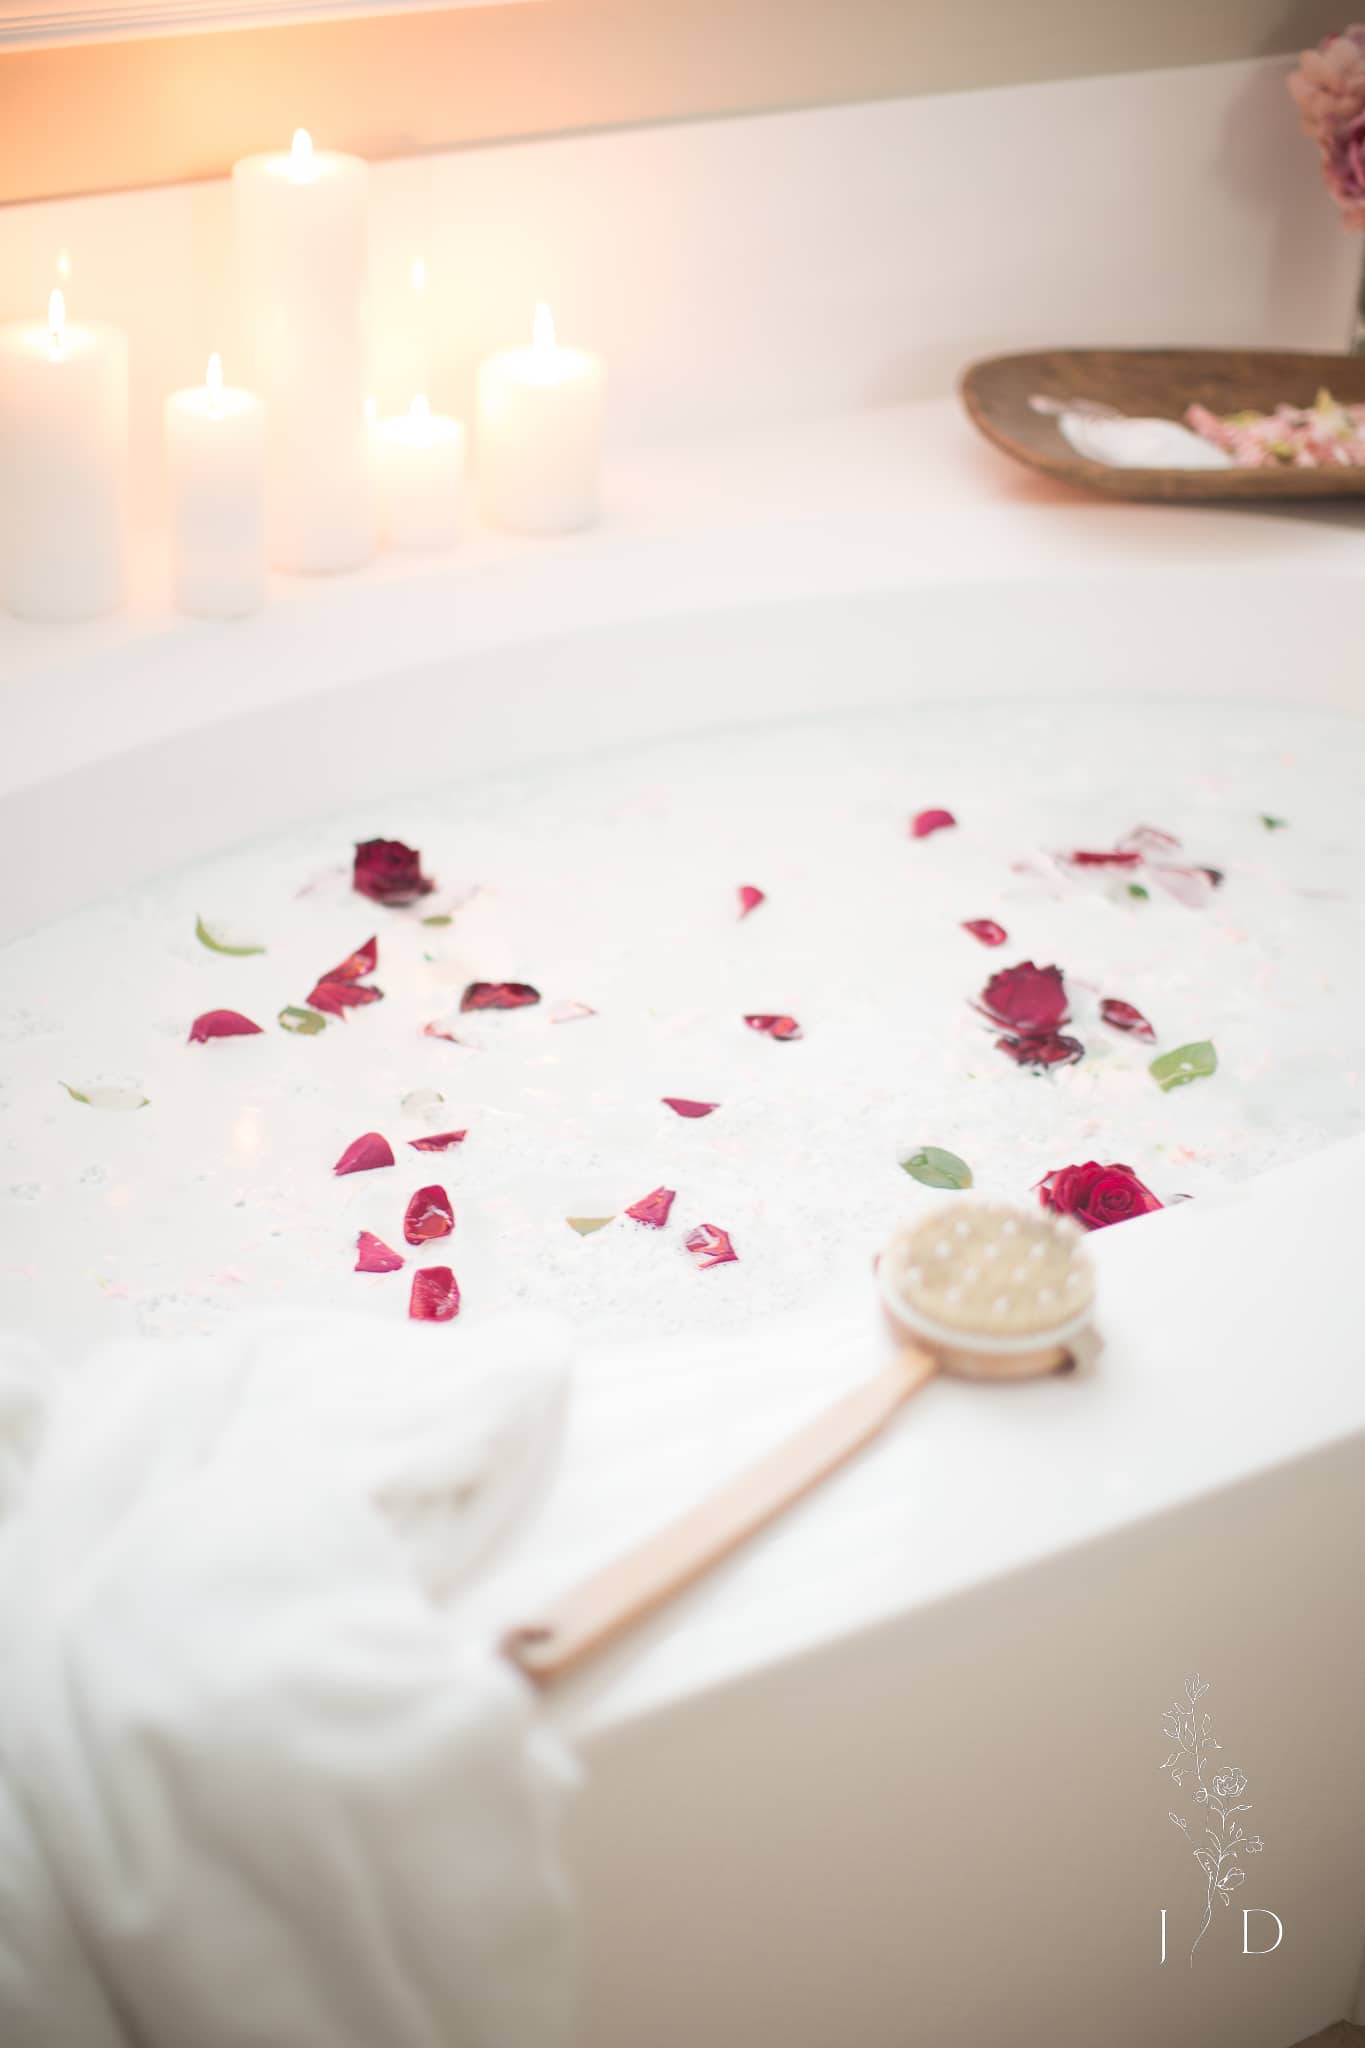 Beautiful bath with red rose petals 